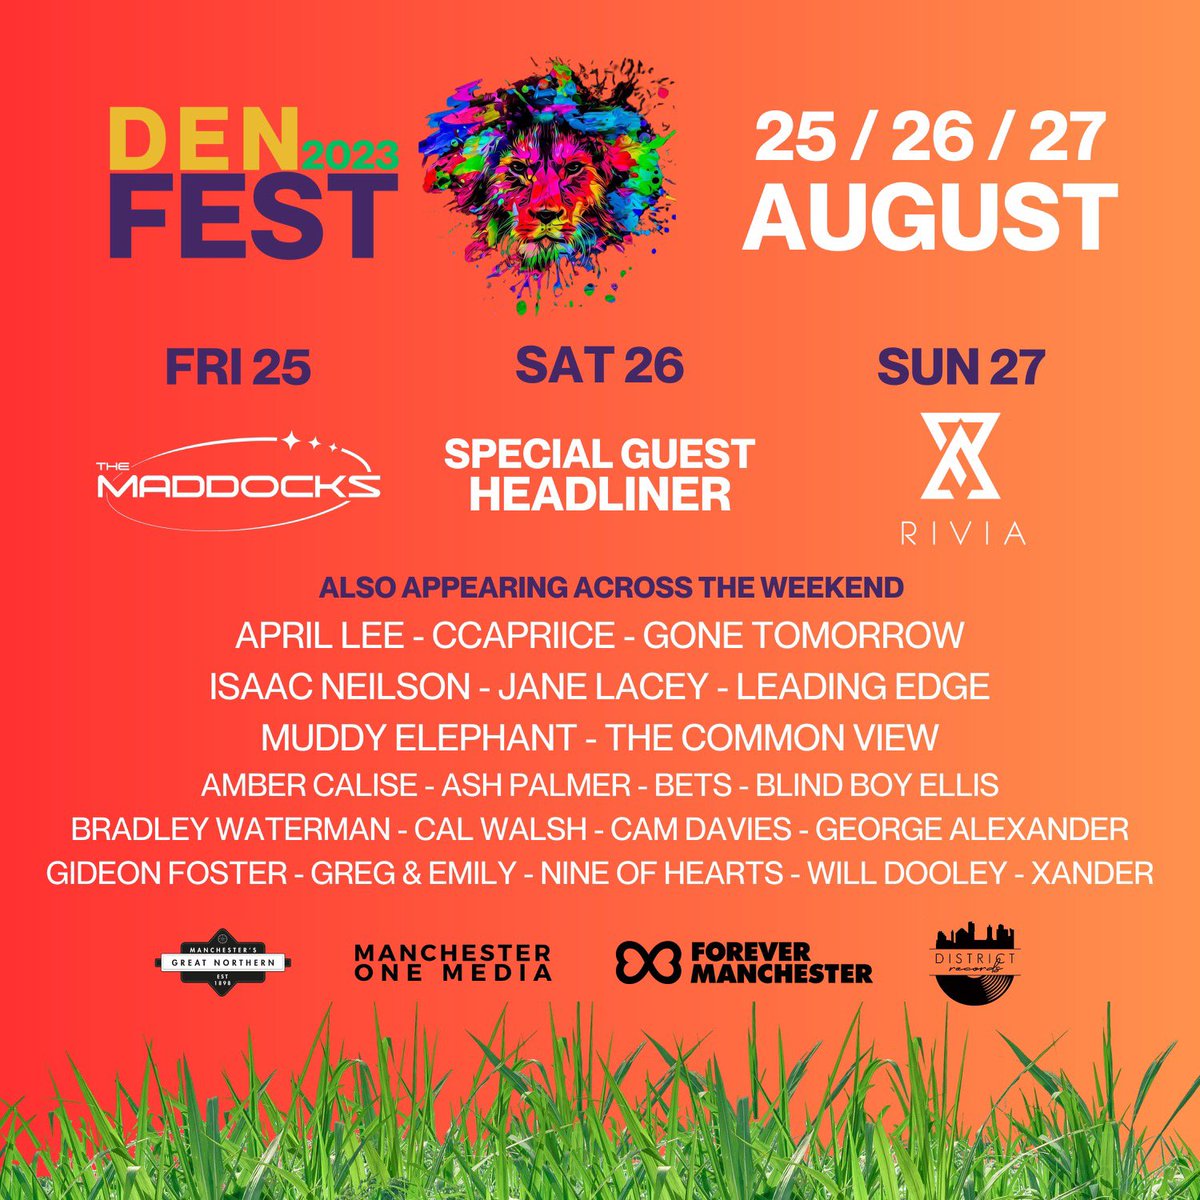 🎶🦁 DenFest 2023 🦁🎶 @lionsdenmcr @deansgatemews @gnwmanchester 

SAVE THE DATES 25 / 26 / 27 AUGUST 

Your Headliners this year are @themaddocksband & @rivia.band  plus VERY SPECIAL GUESTS on the Saturday 👀 Any guesses?🤔

A full weekend of Live Music and it’s all FREE ENTRY